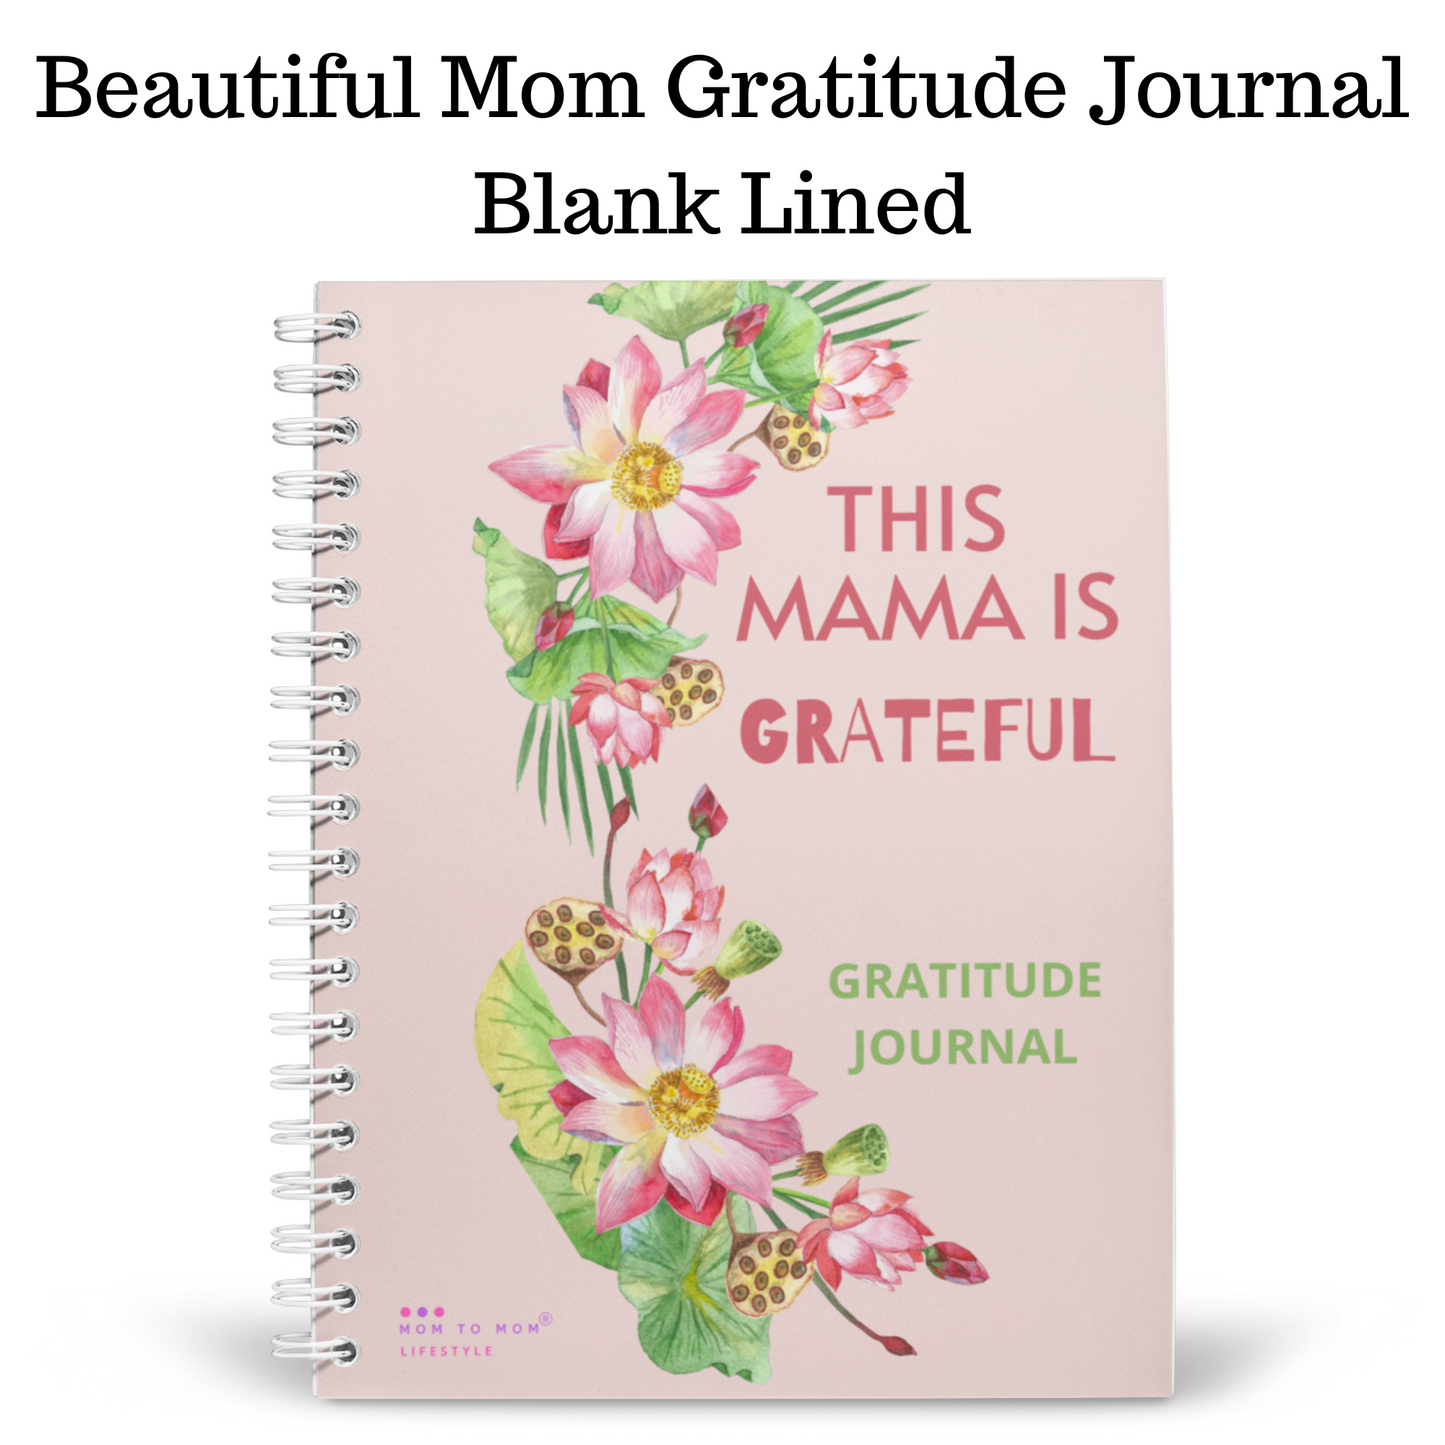 Mom gratitude blank lined journal Houston Texas Gift Shop For Her Hey You Gift Box